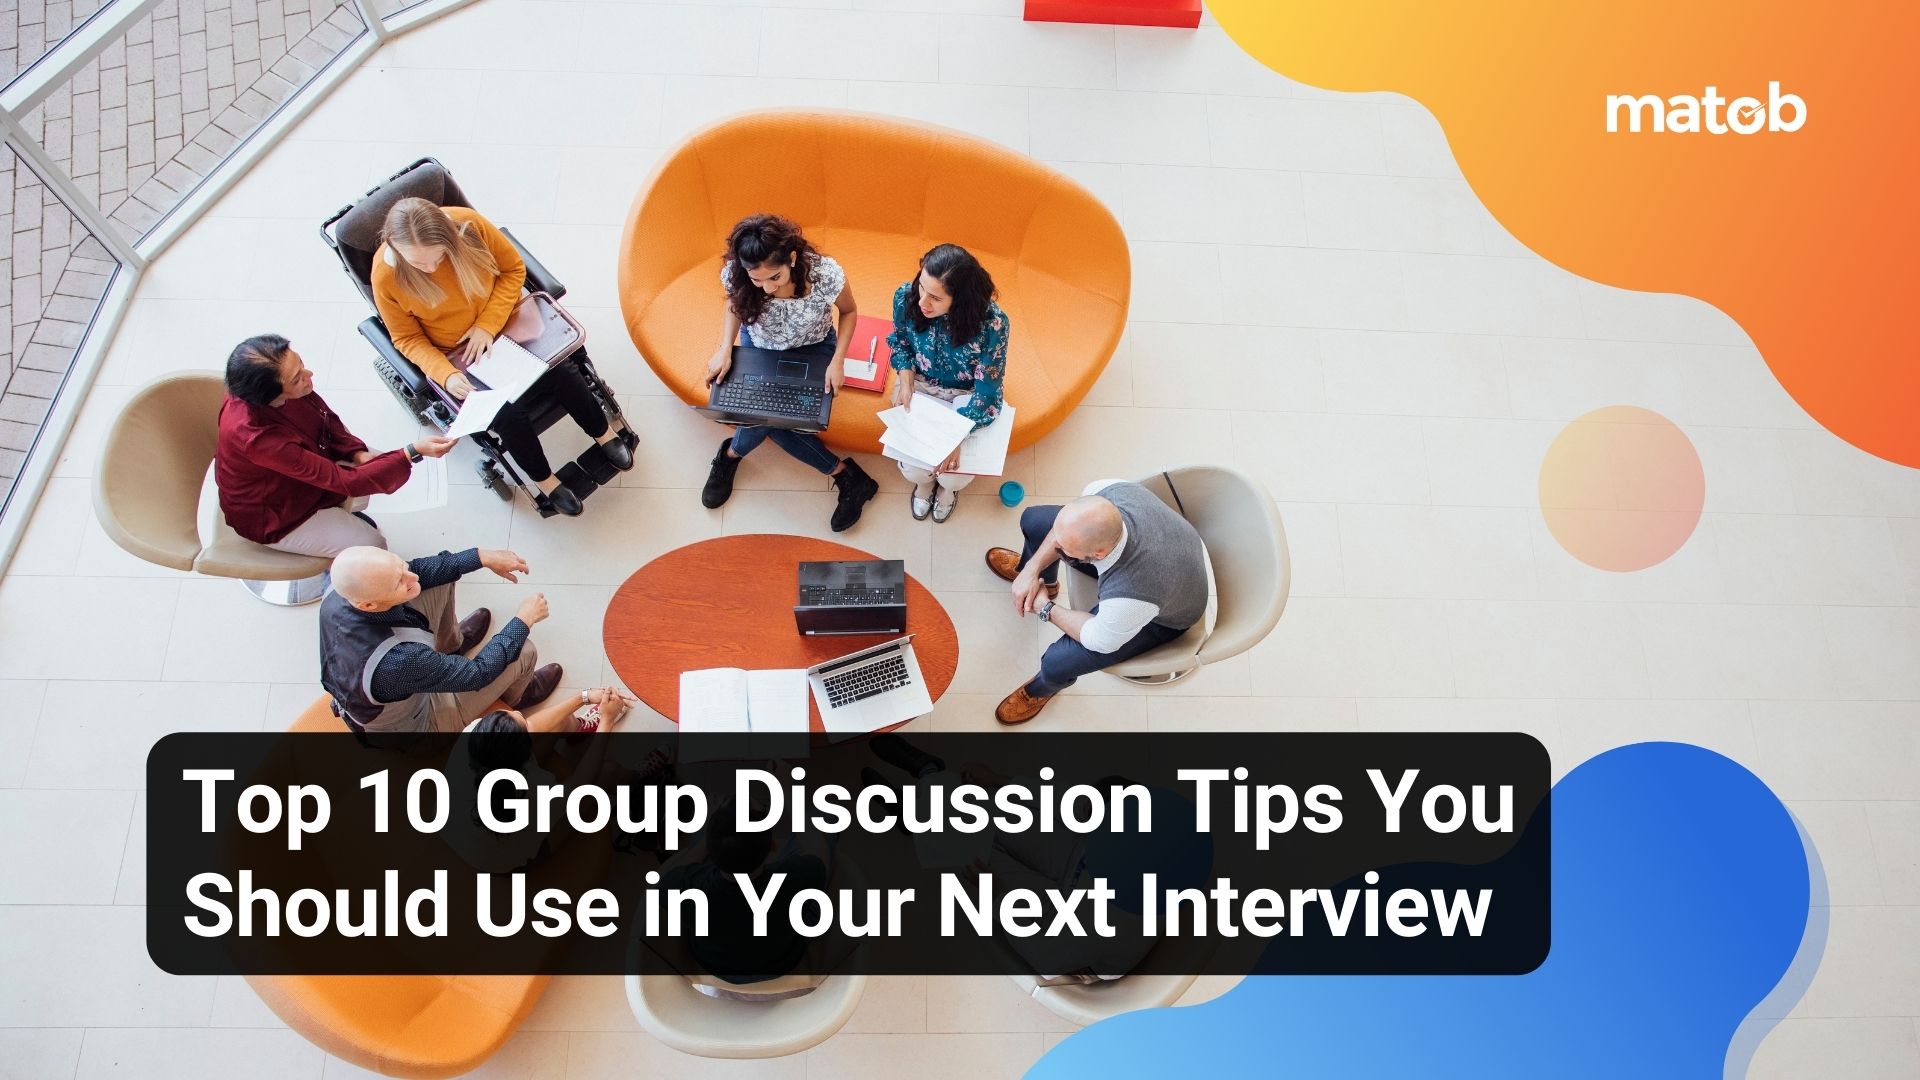 Top 10 Group Discussion Tips You Should Use in Your Next Interview - Matob EN